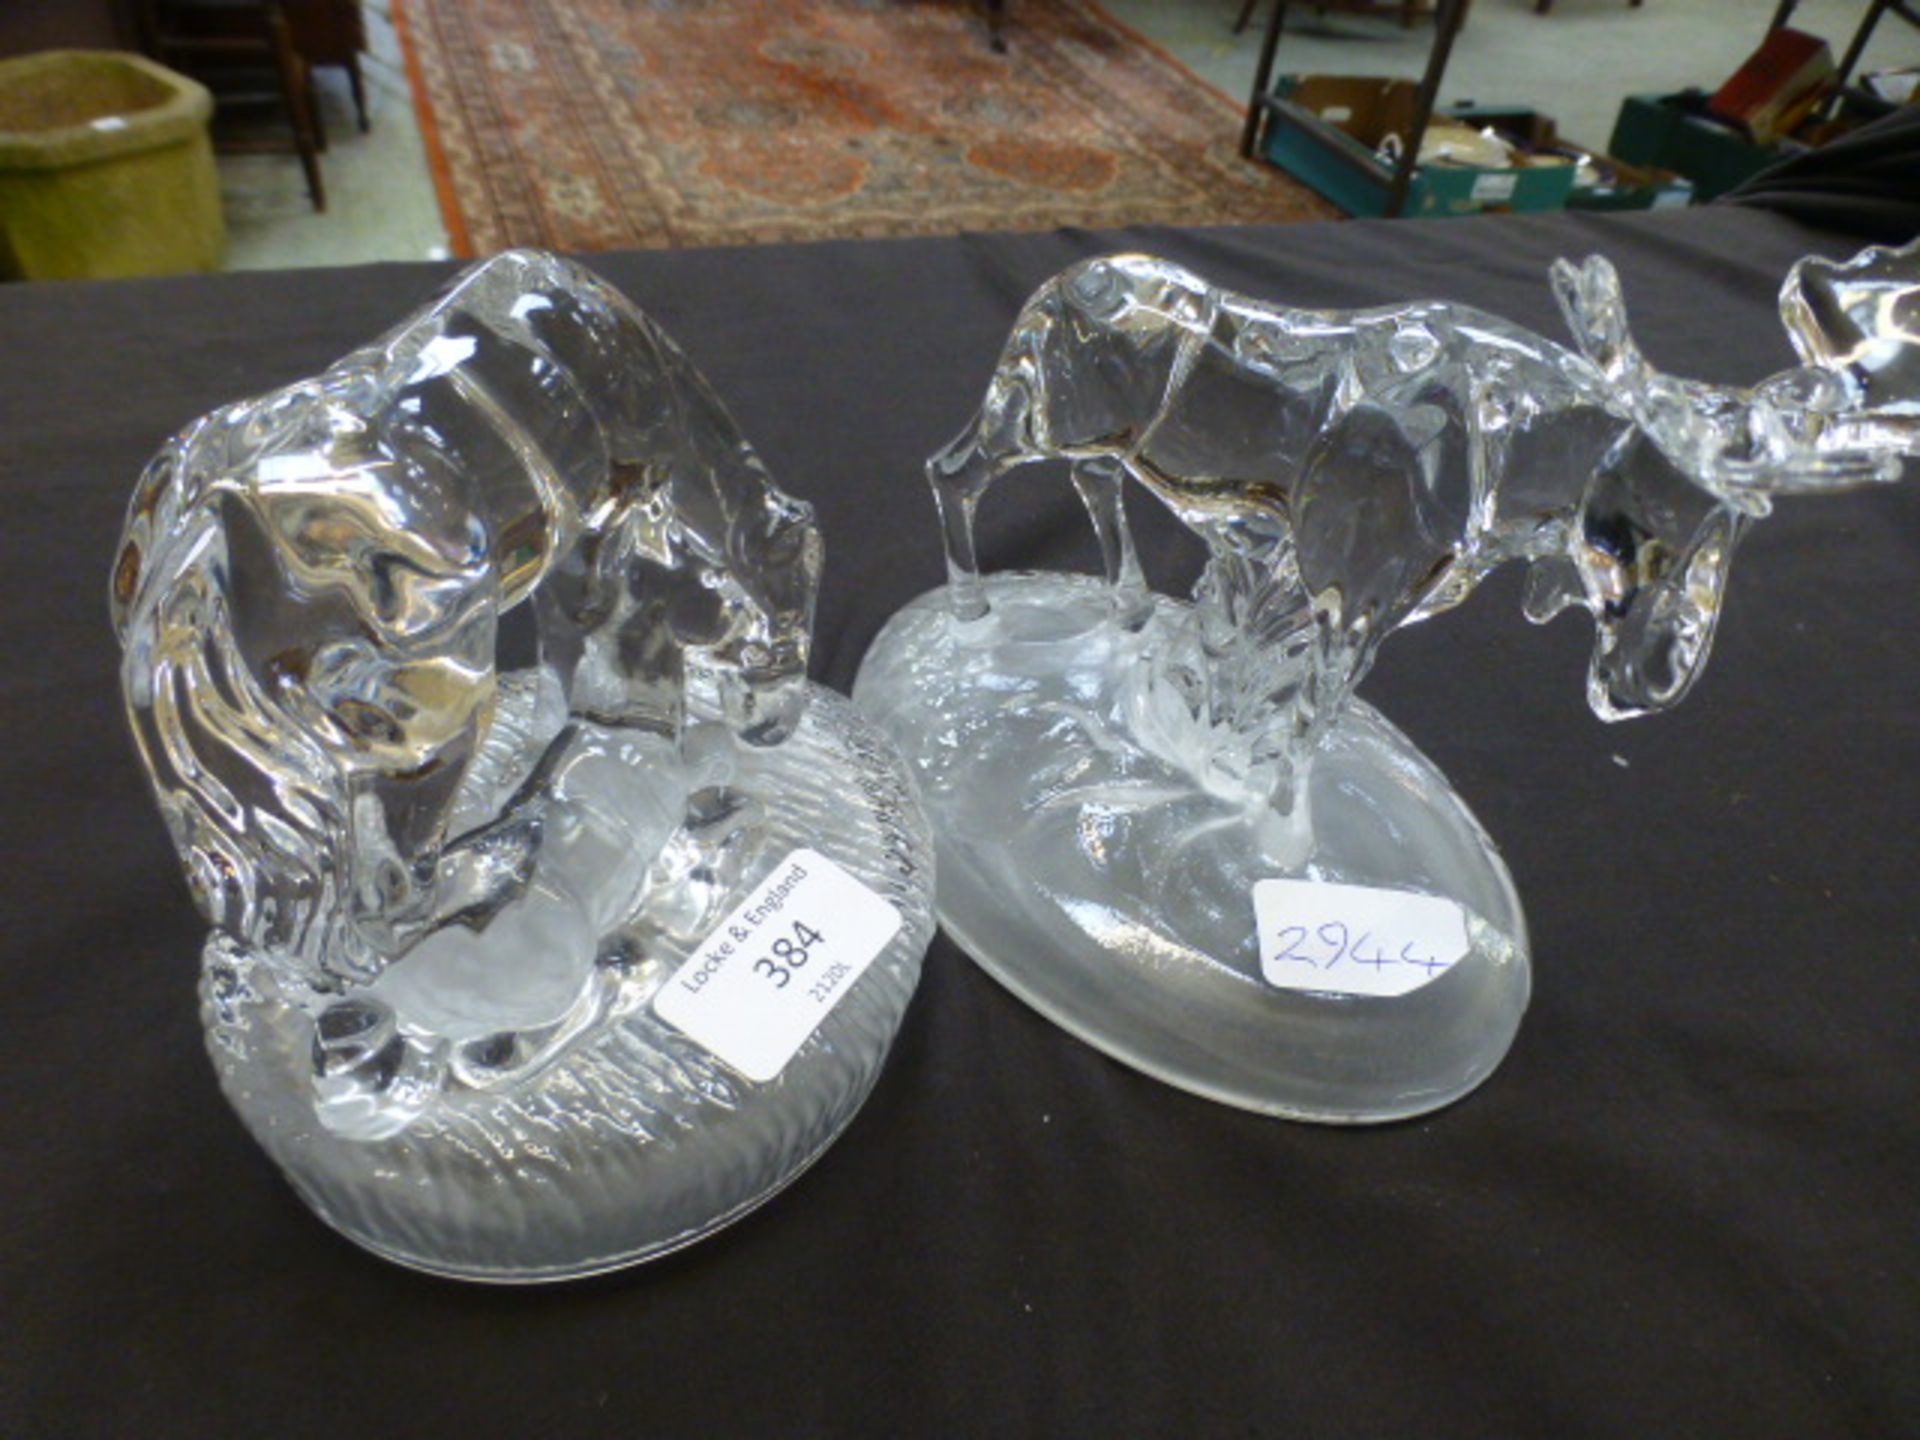 Two glass models of horses and stag